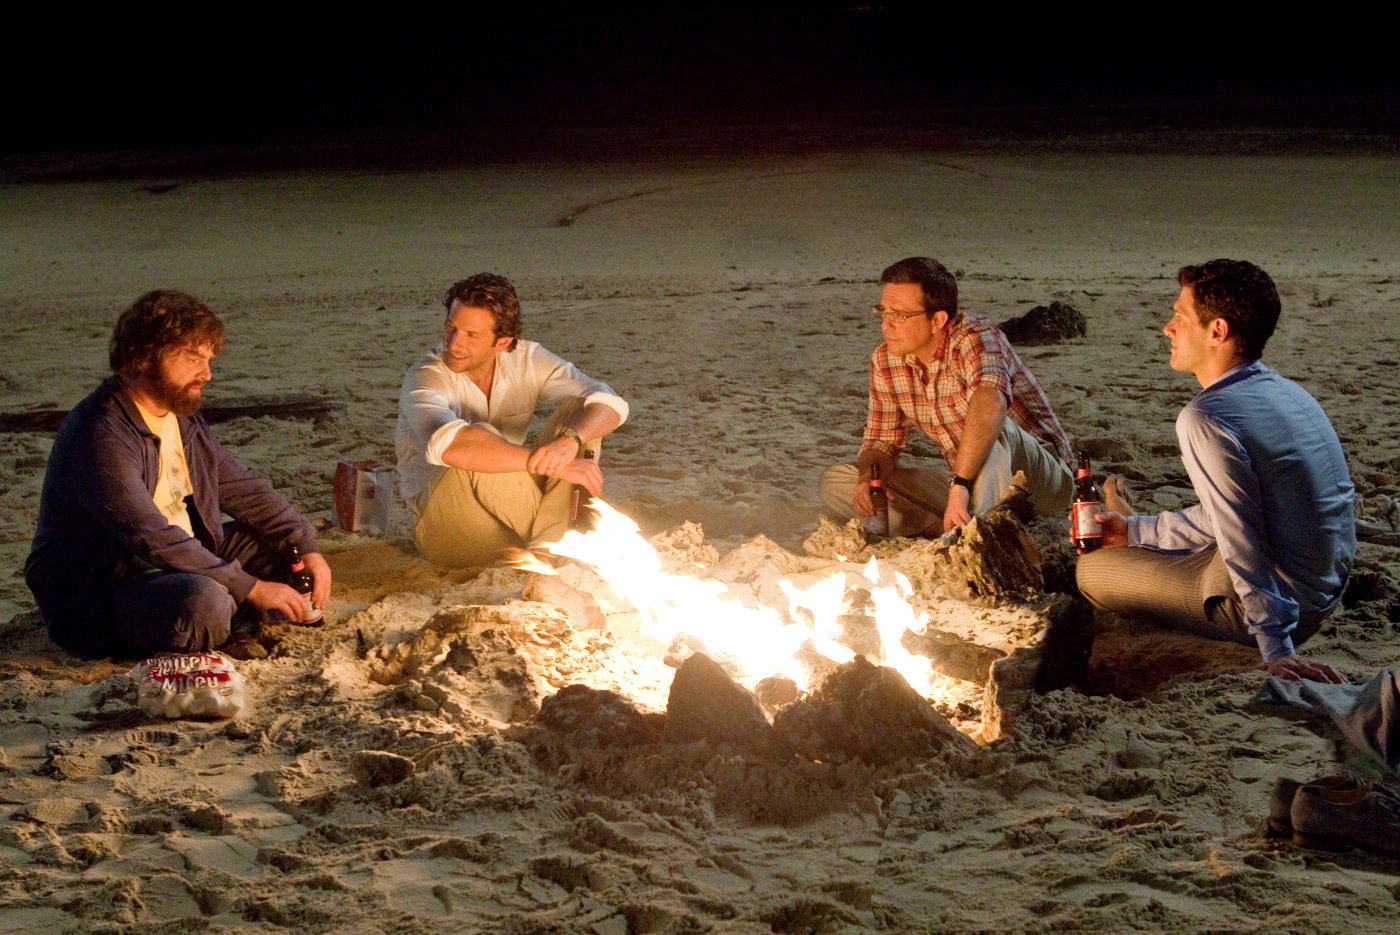 Zach Galifianakis, Bradley Cooper, Ed Helms and Justin Bartha in Warner Bros. Pictures' The Hangover Part II (2011)